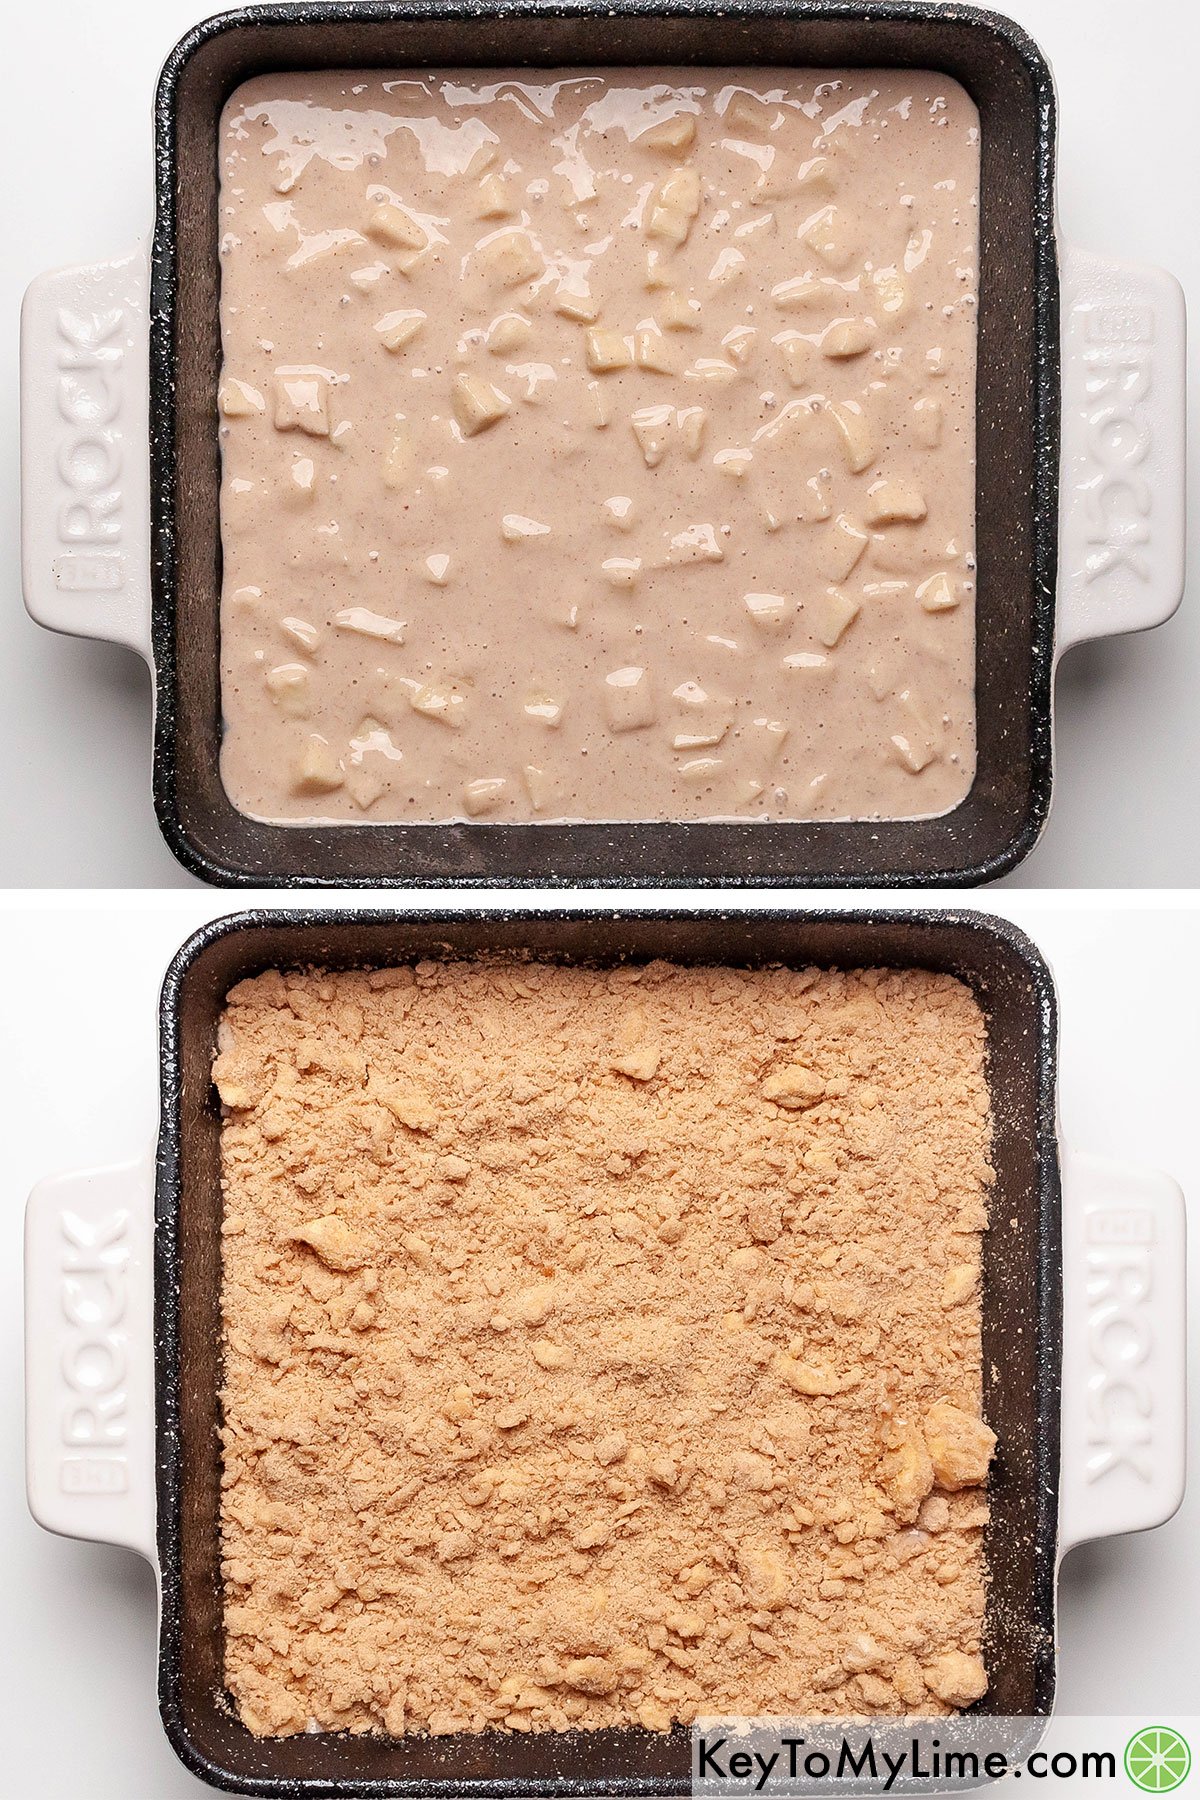 Pouring coffee cake batter in a baking dish, then topping it with streusel topping.